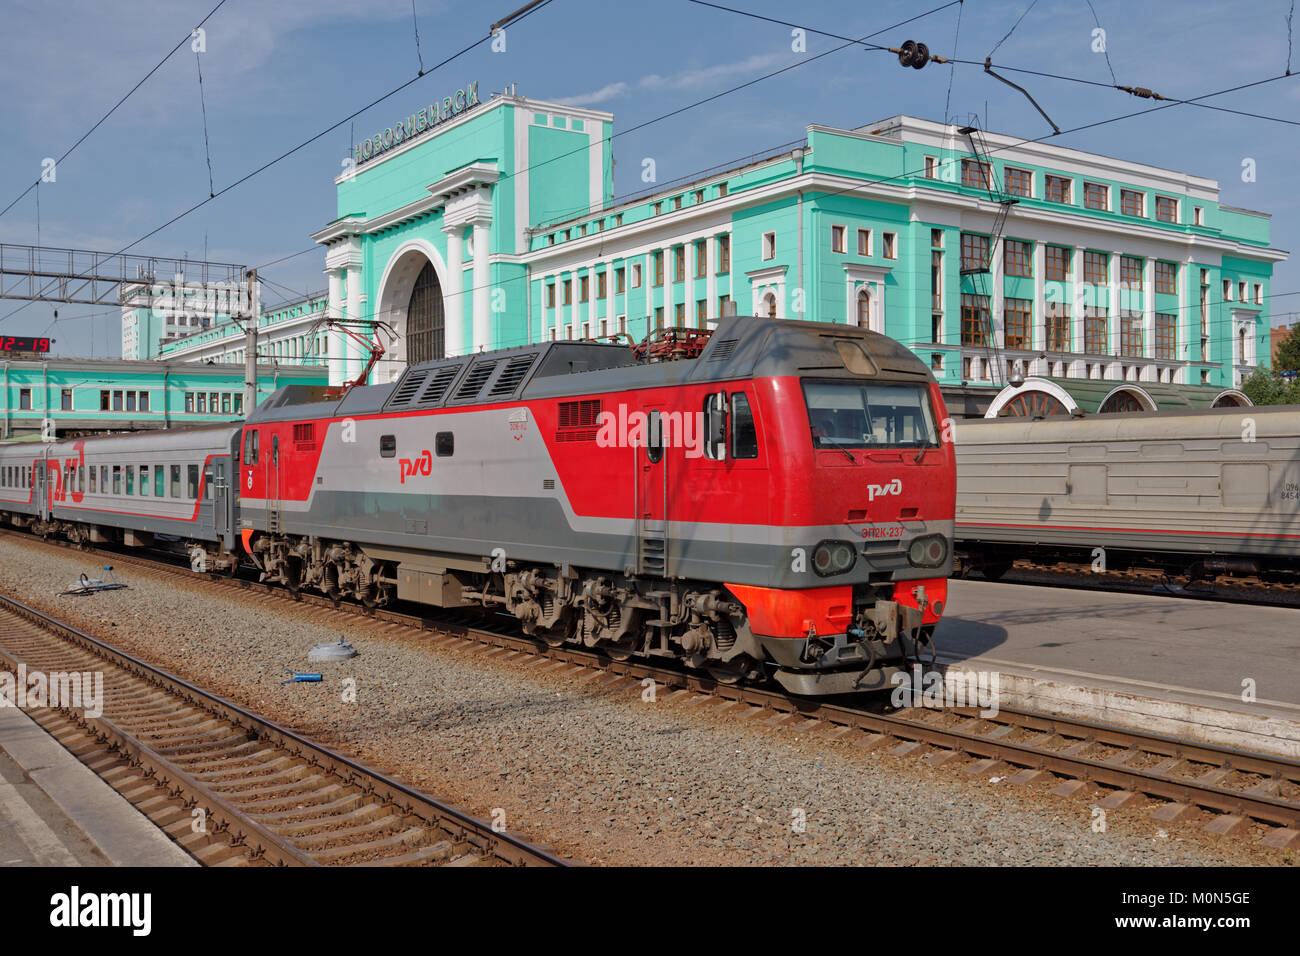 Novosibirsk, Russia - August 25, 2014: Passenger train arriving on the main railroad station of Novosibirsk. Stock Photo